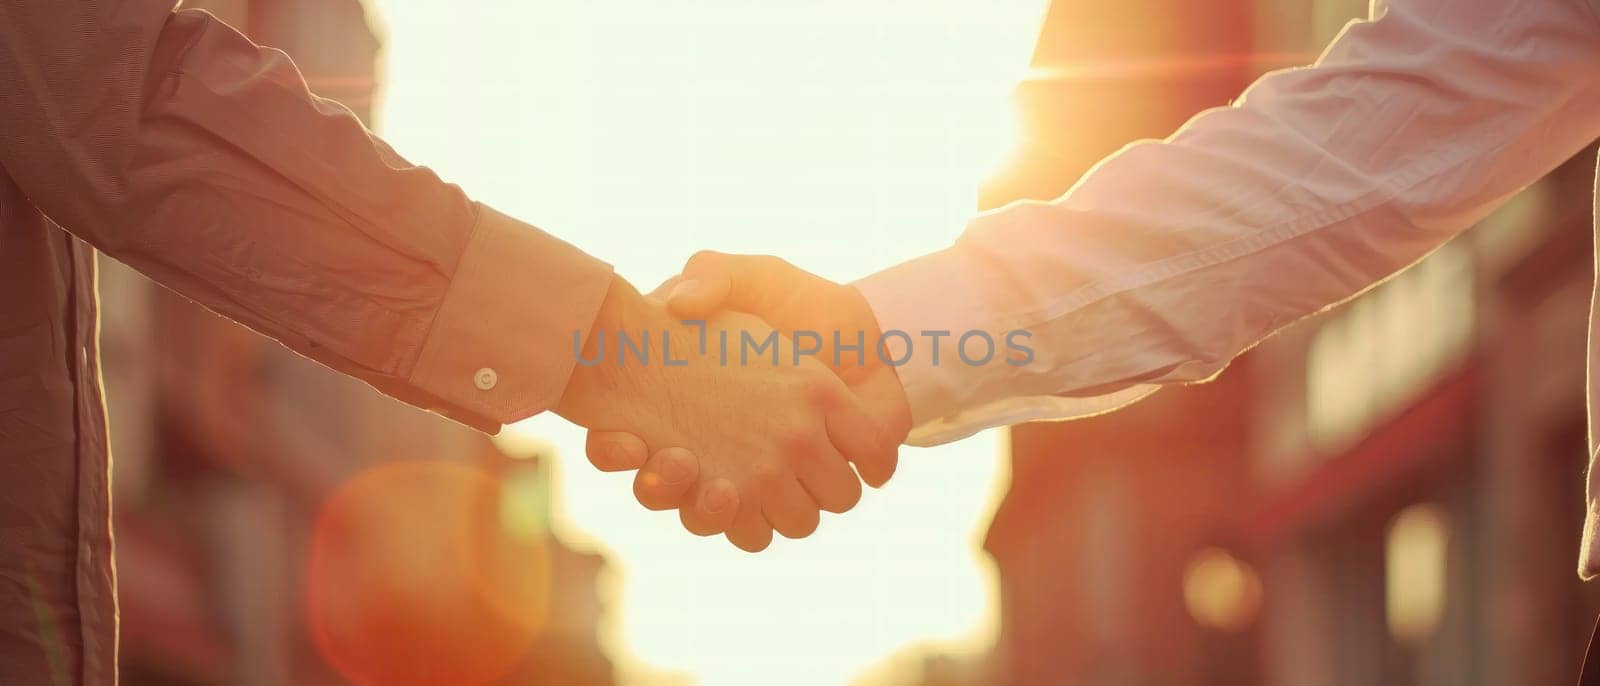 Two men shake hands in a business meeting by AI generated image.